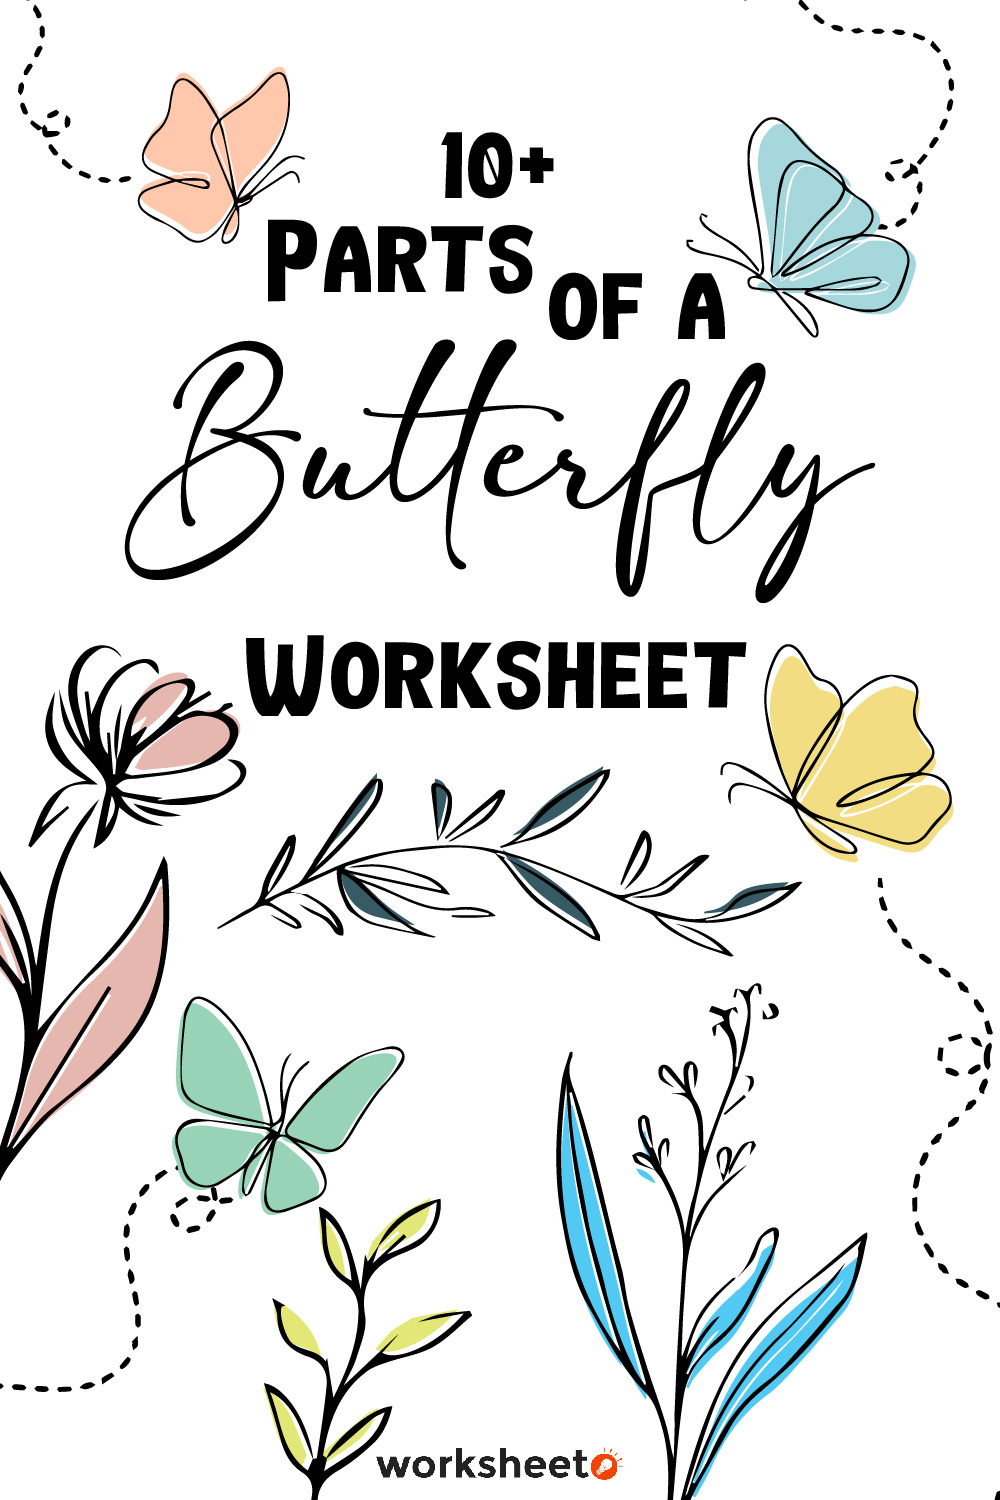 13 Images of Parts Of A Butterfly Worksheet